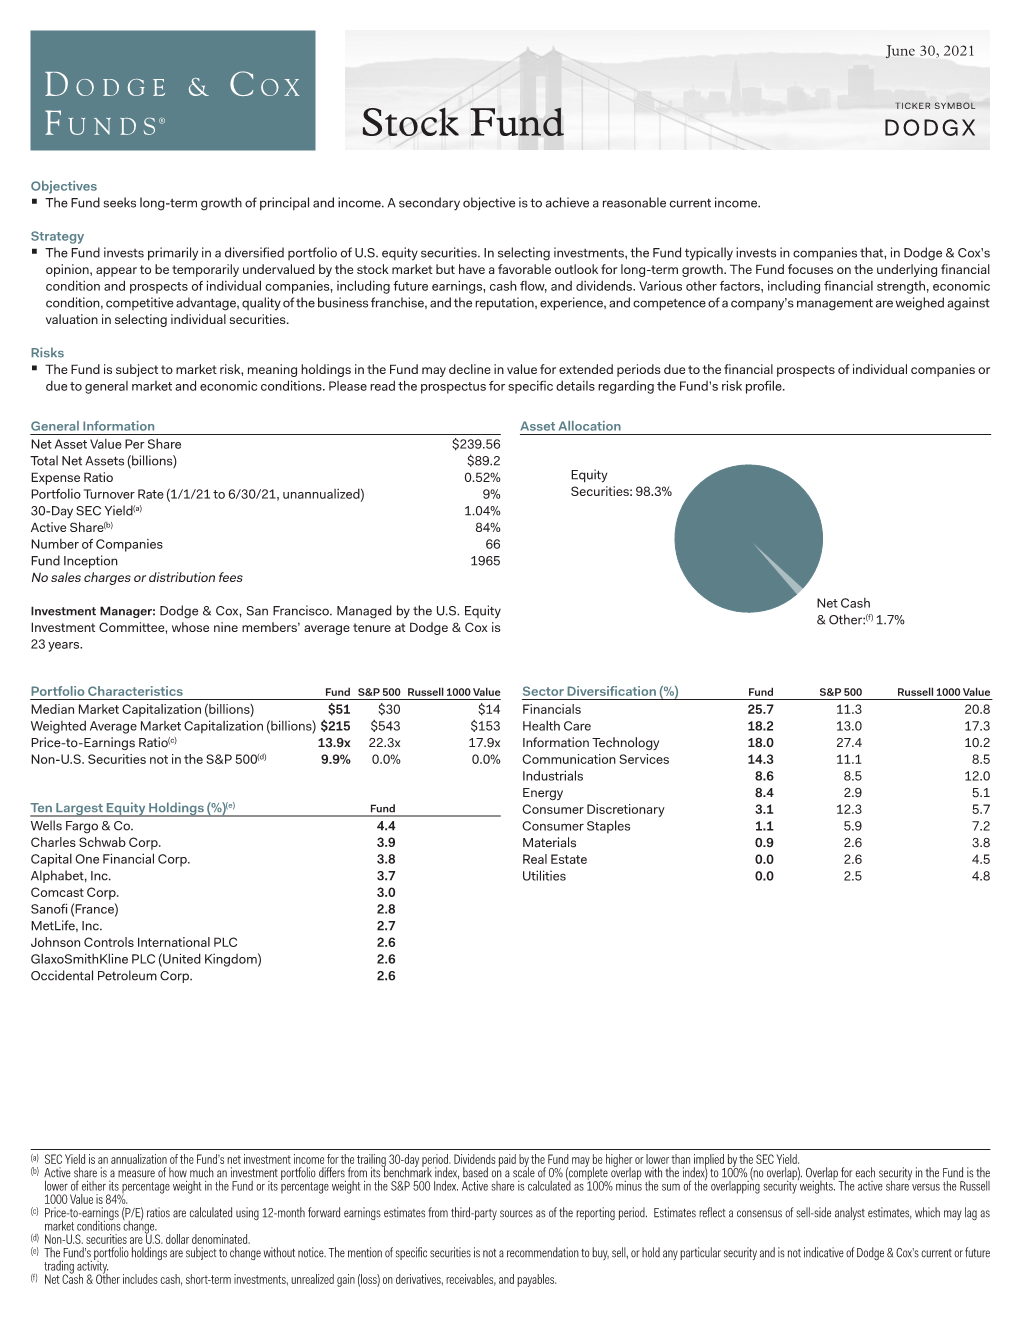 Dodge & Cox Stock Fund Fact Sheet Dated June 30, 2021